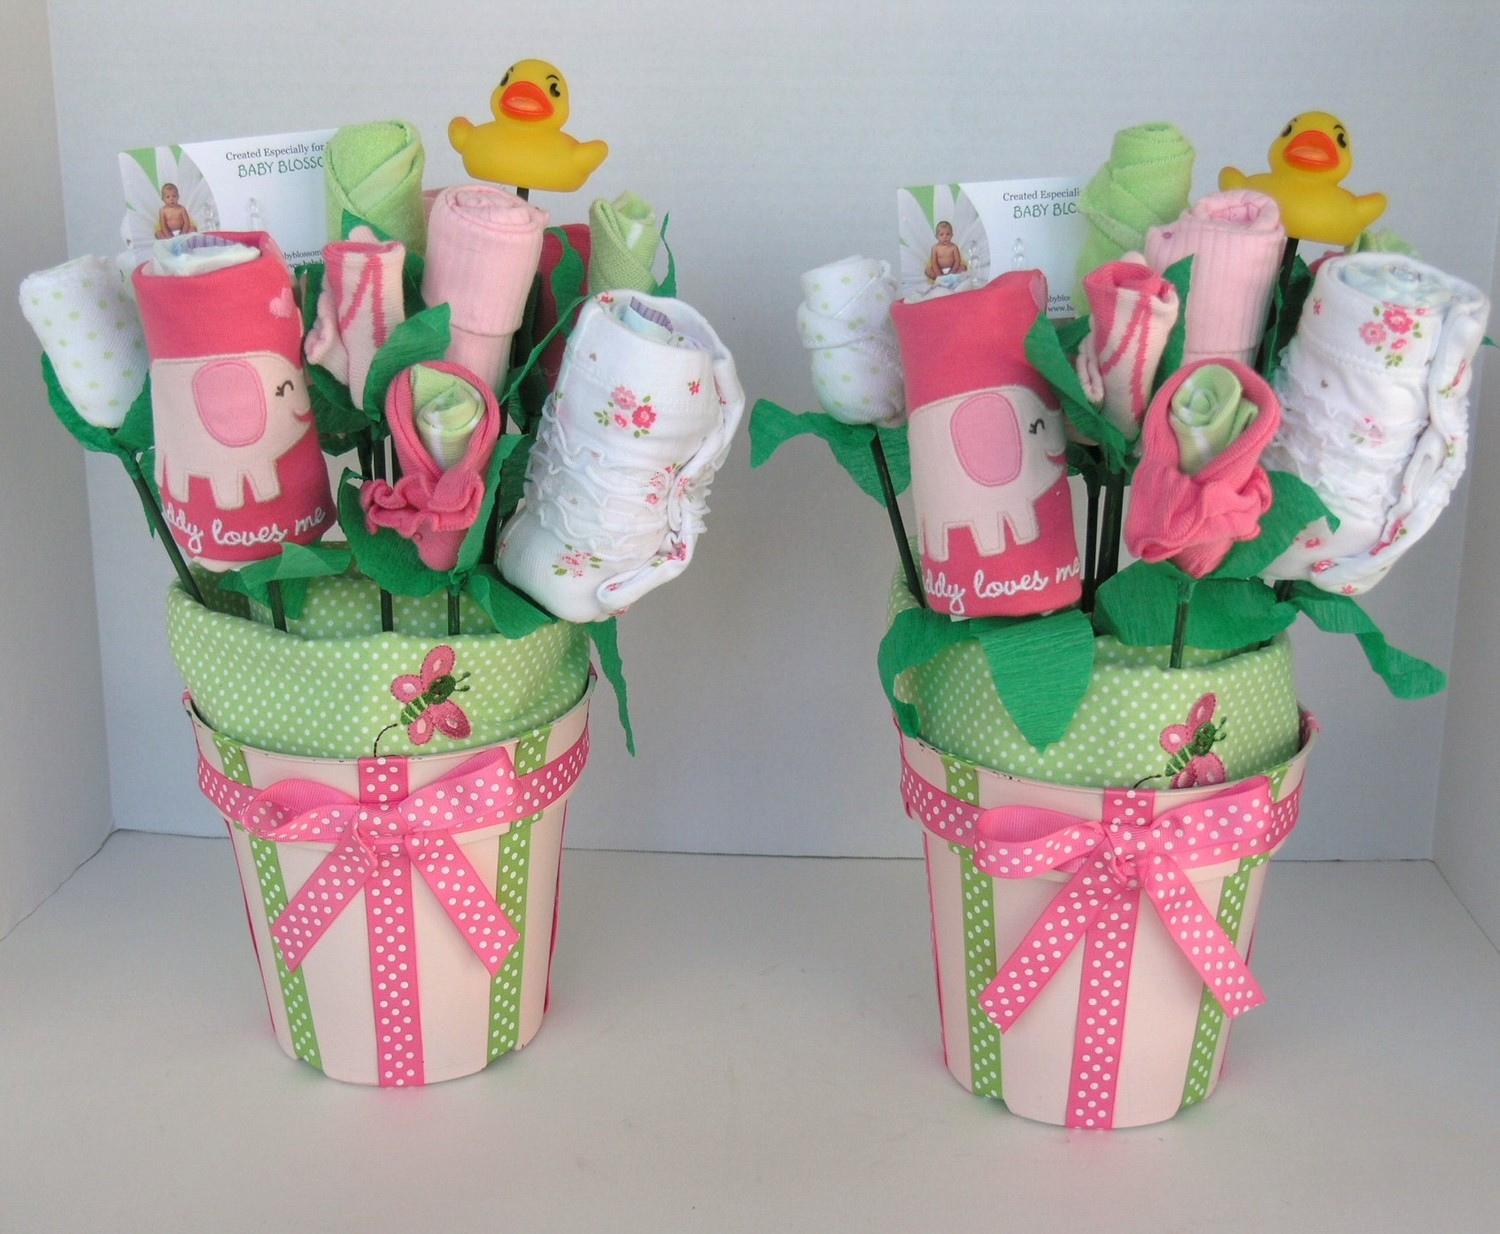 Ideas For New Baby Gift
 Five Best DIY Baby Gifting Ideas for The Little Special